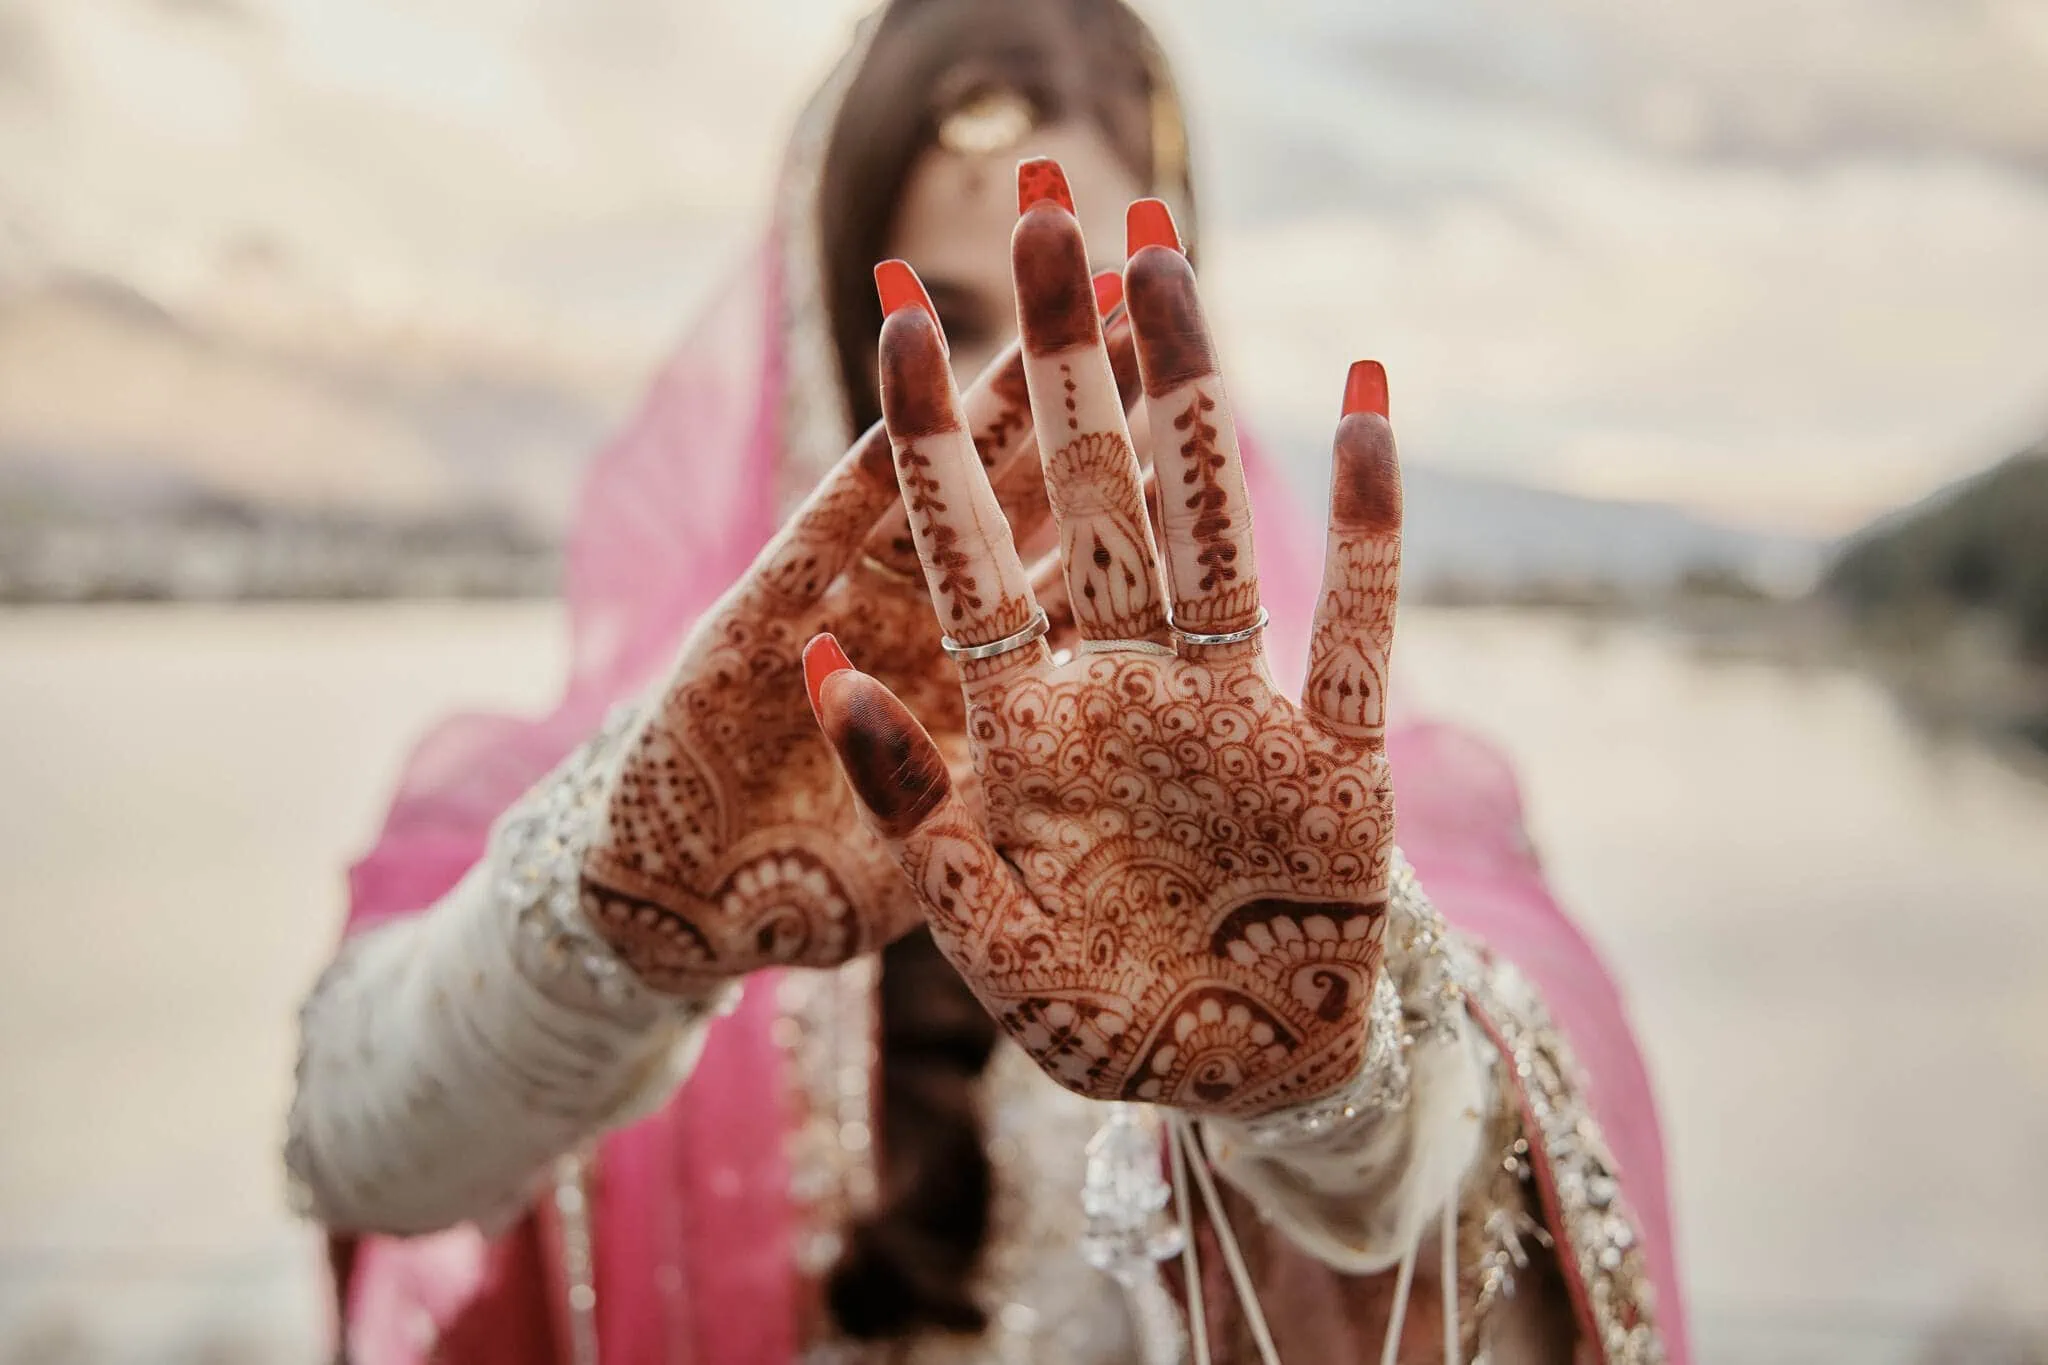 Queenstown New Zealand Elopement Wedding Photographer - A bride with henna on her hands at the Queenstown Islamic Wedding of Wasim and Yumn.